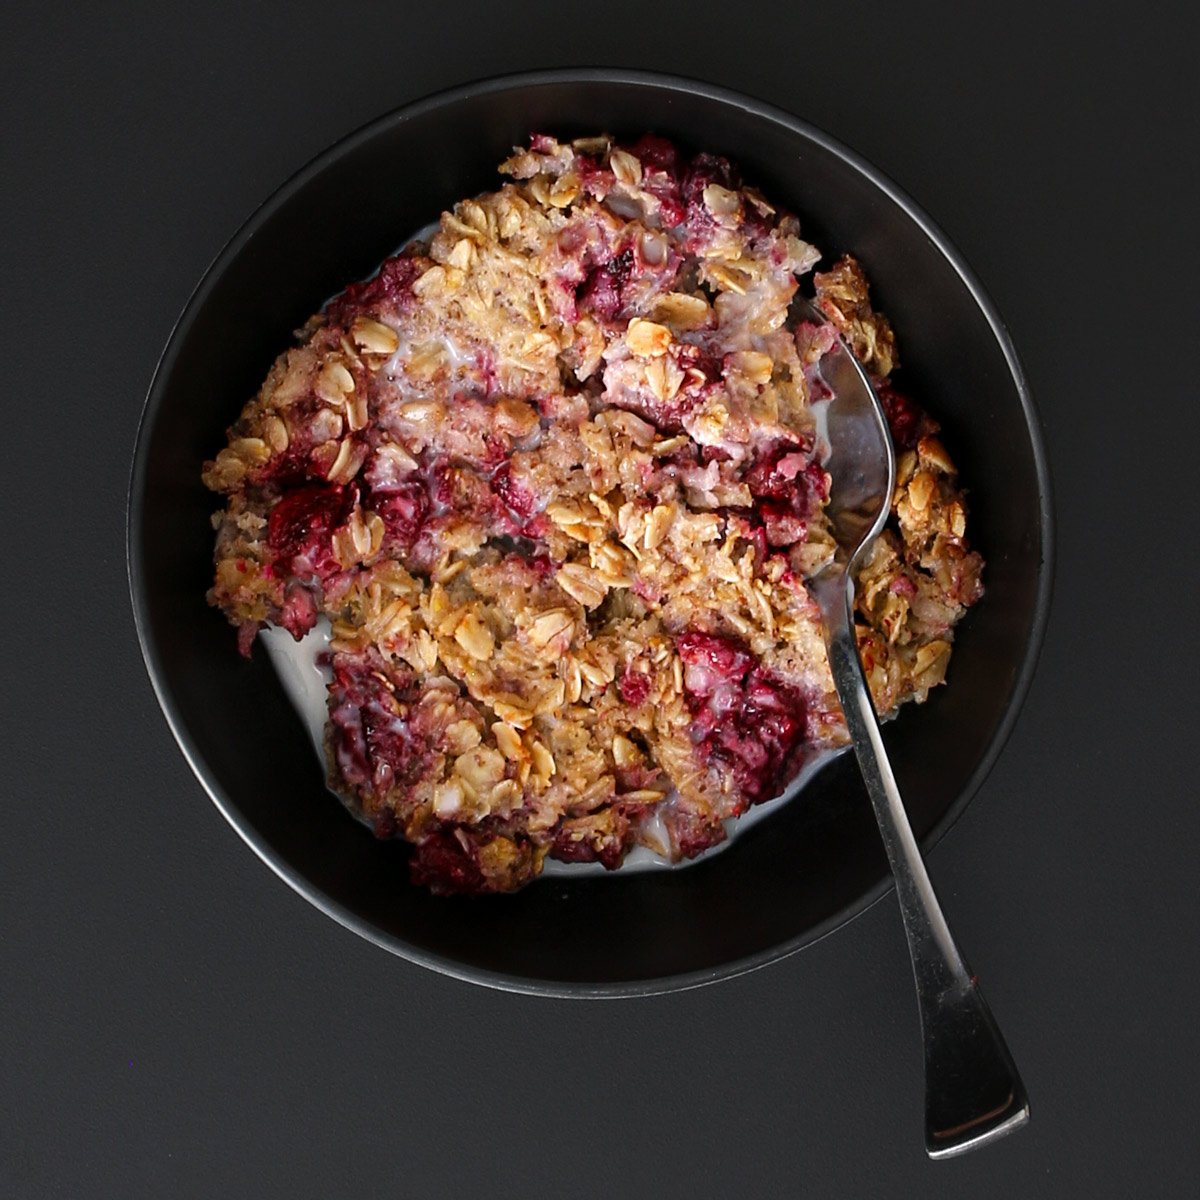 overhead shot of black bowl of vegan baked oatmeal with raspberries and almond milk with a spoon immersed.